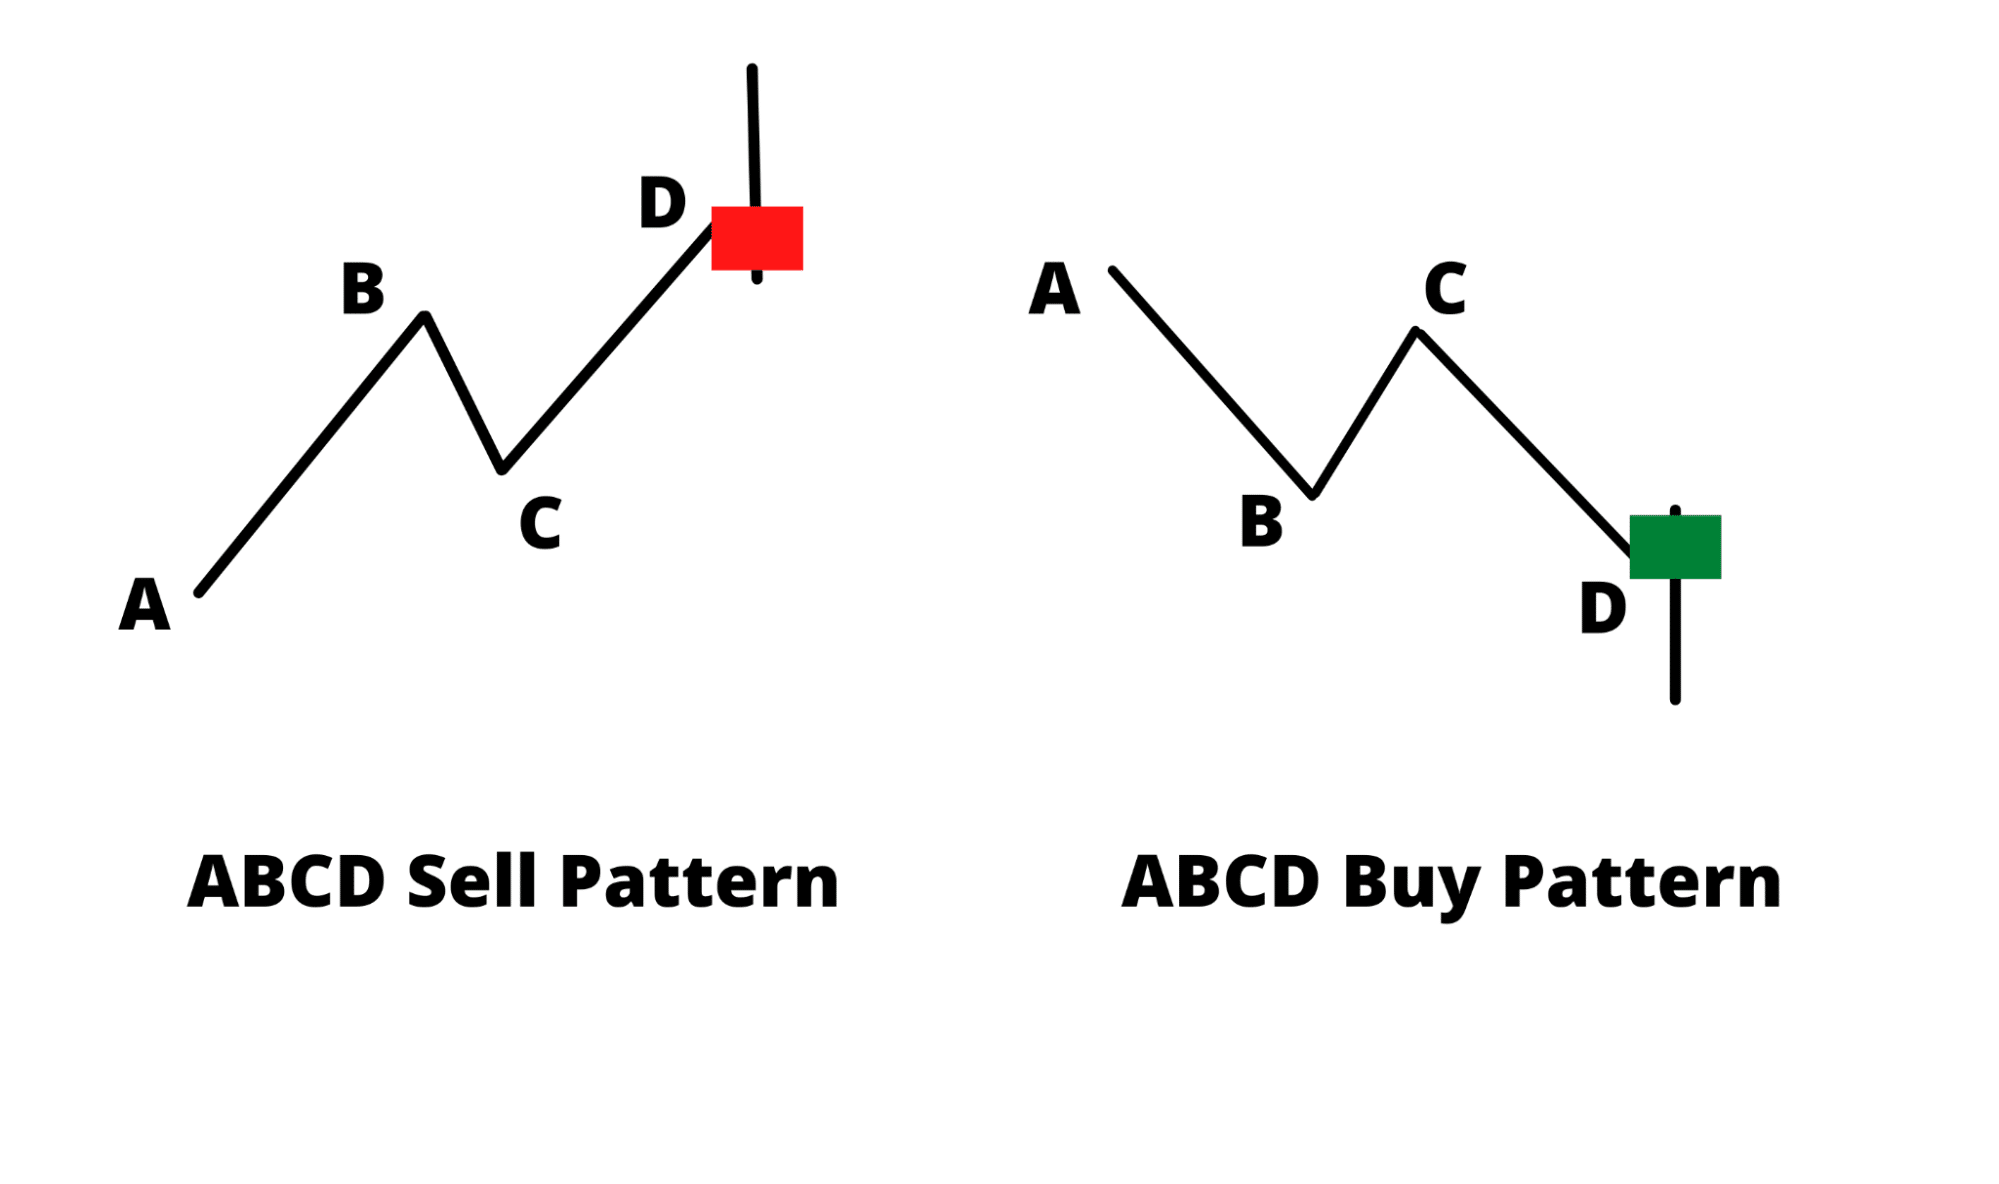 Candlestick reversal in ABCD pattern